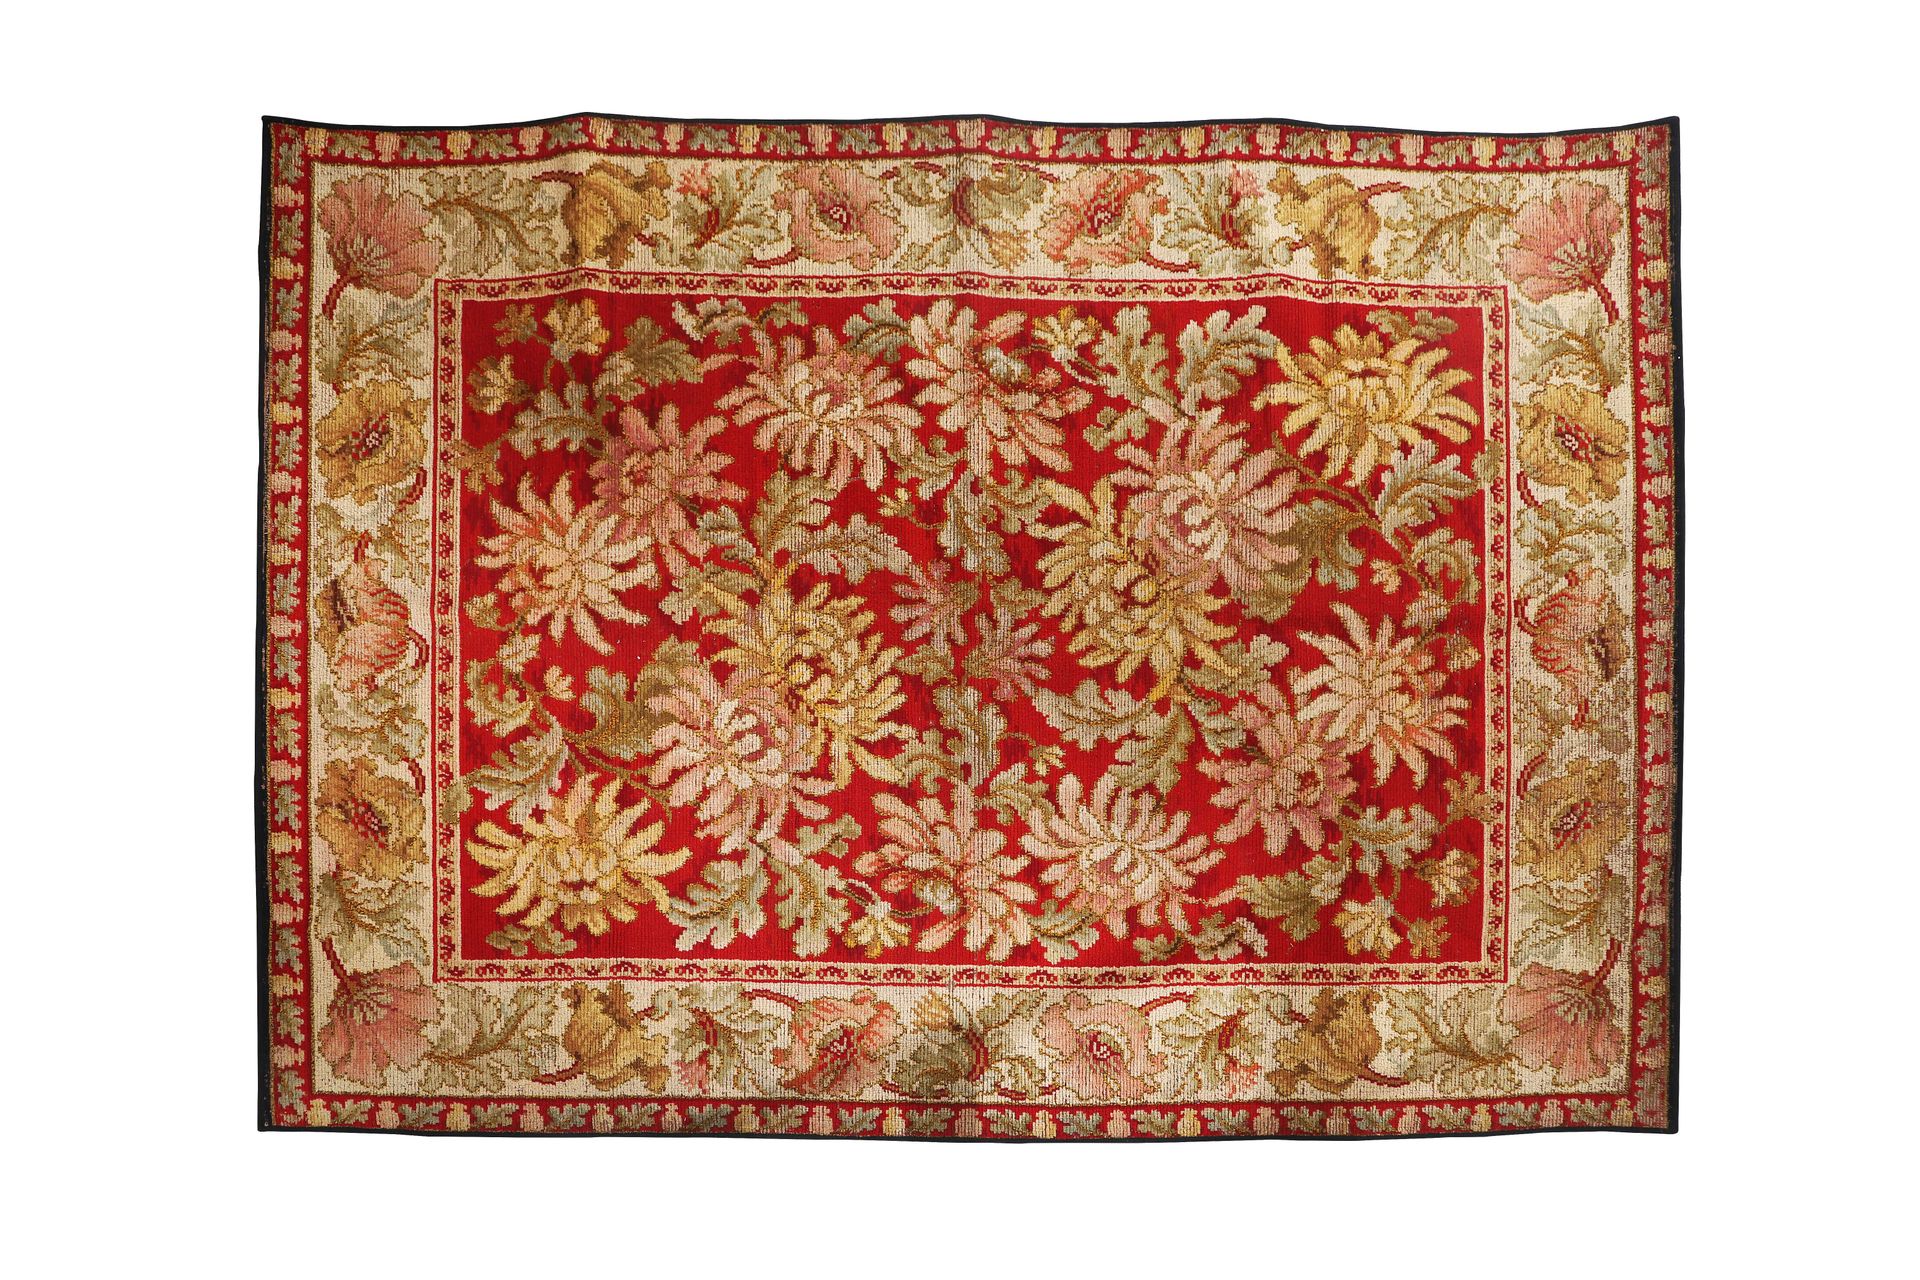 Null Carpeted velvet table or wall hanging, second half of the 19th century, jac&hellip;